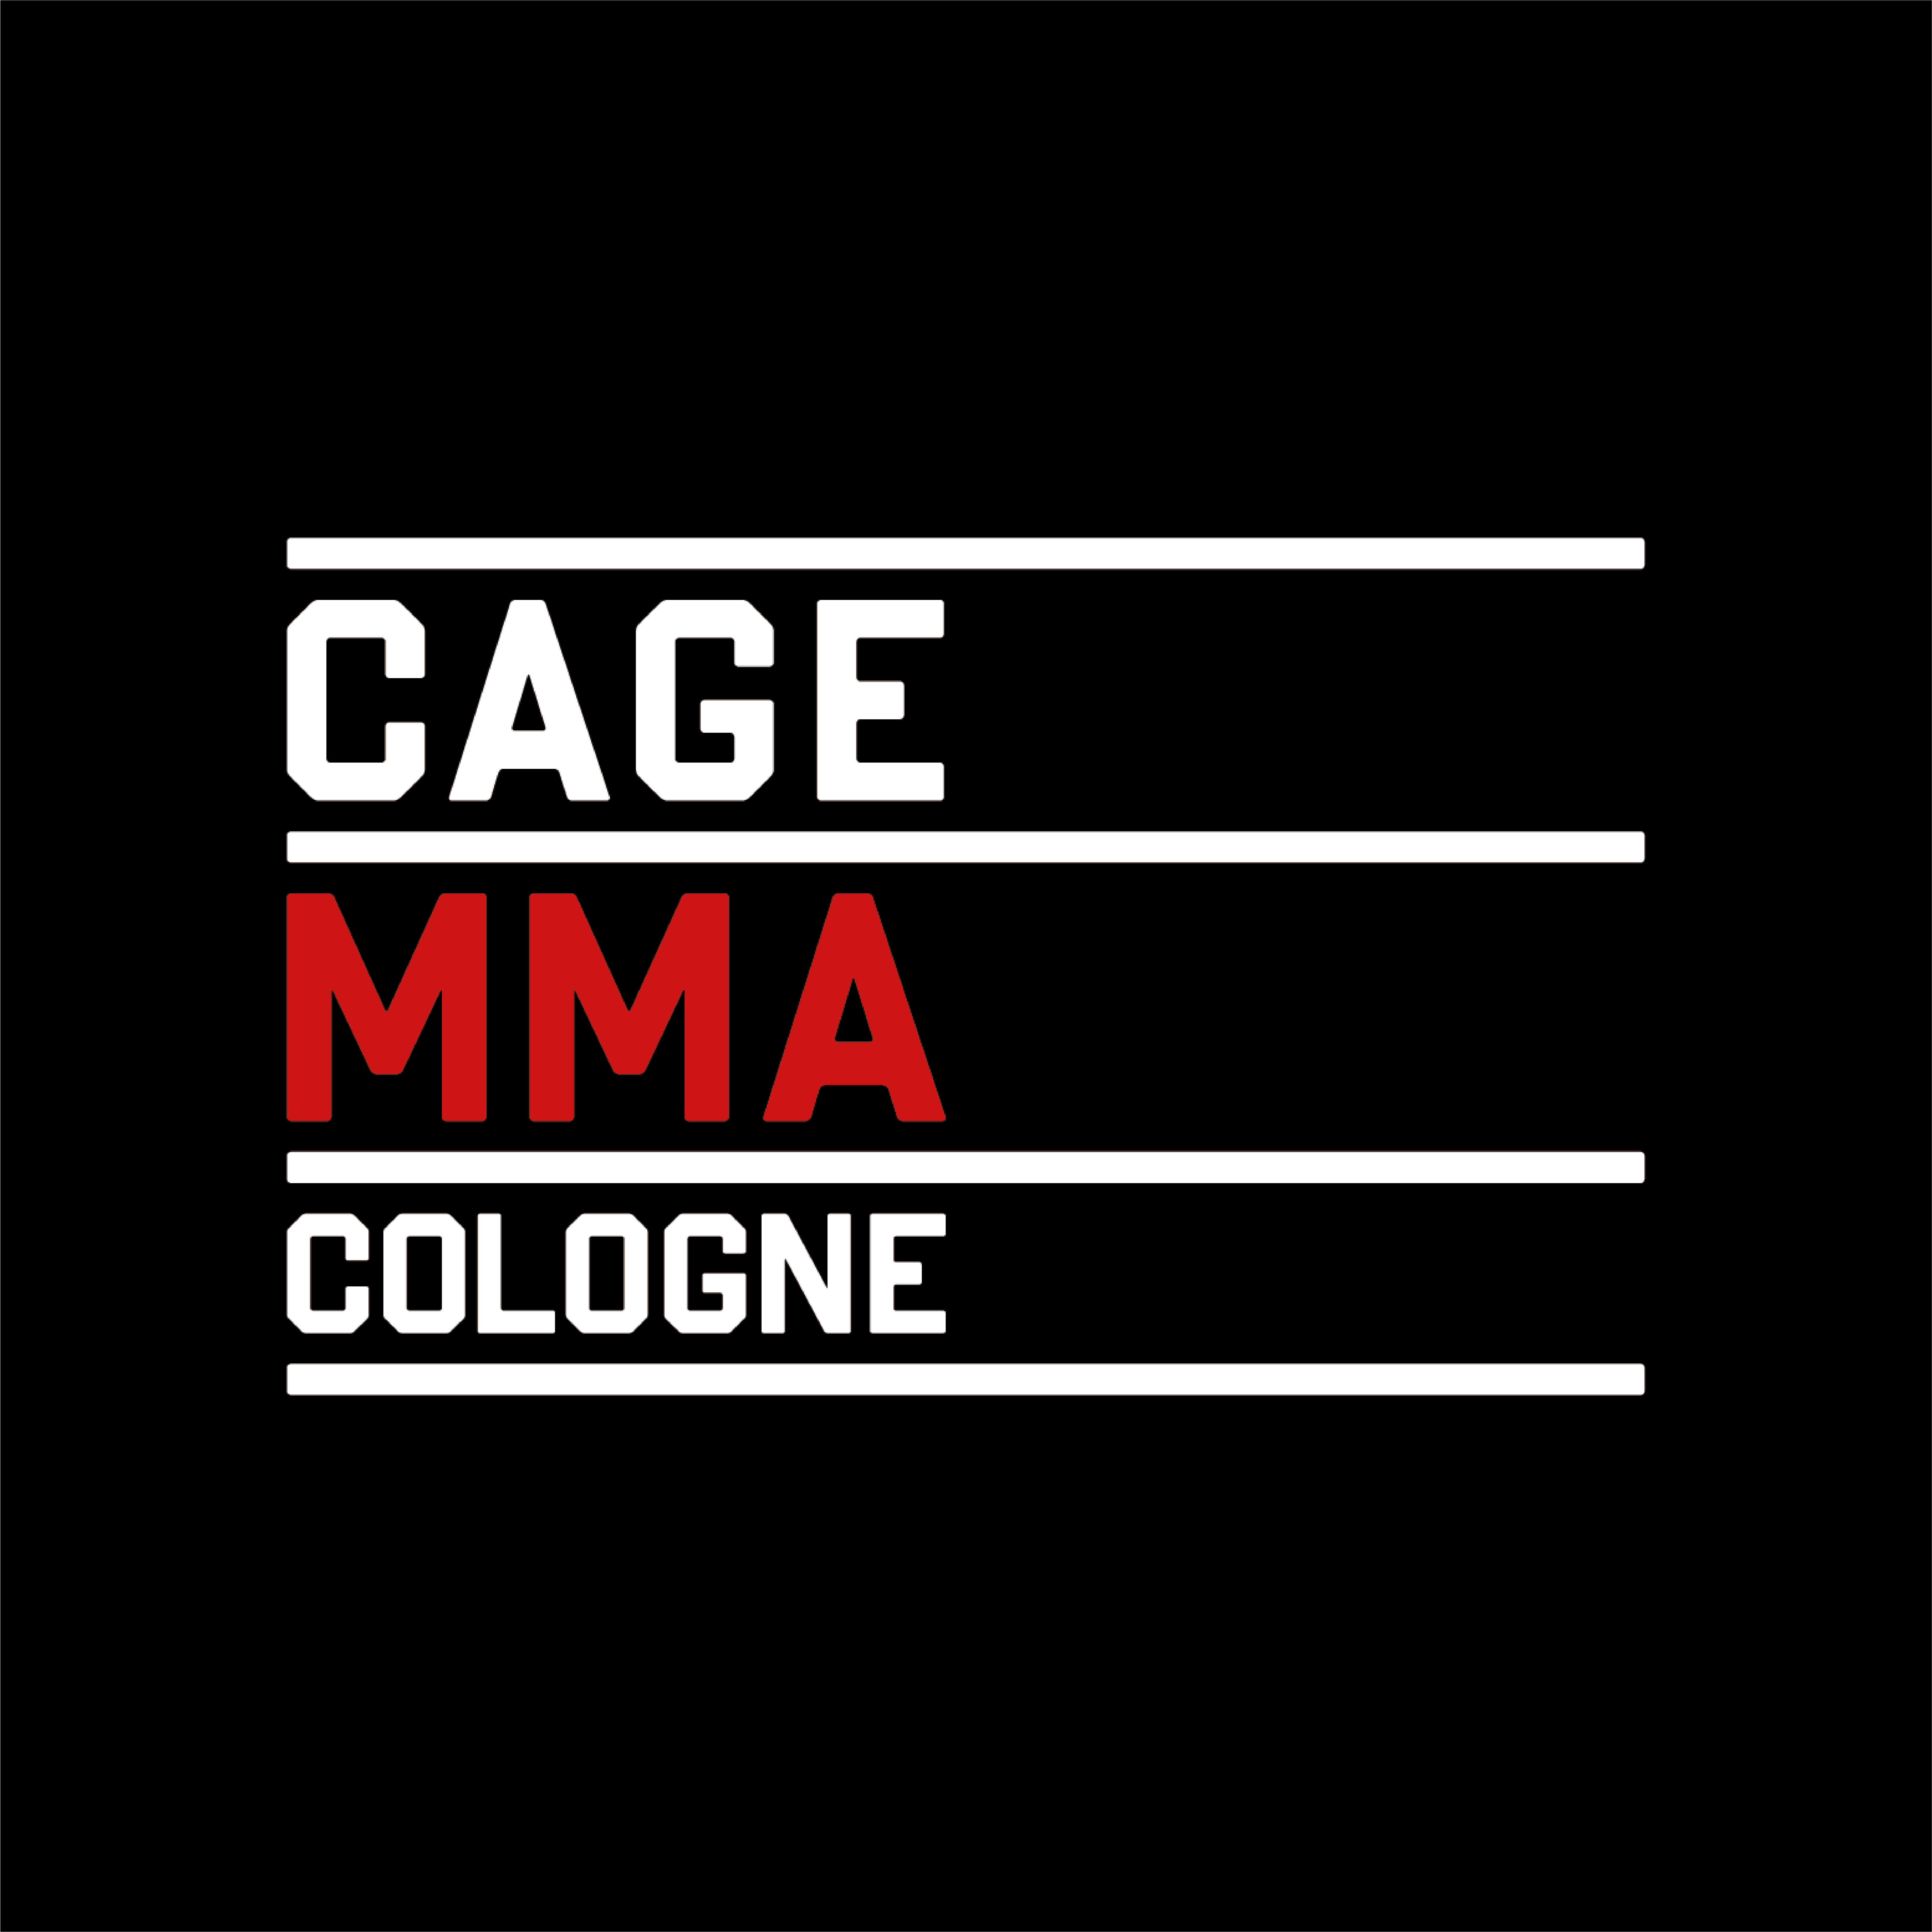 CAGE MMA COLOGNE NIEHL Logo